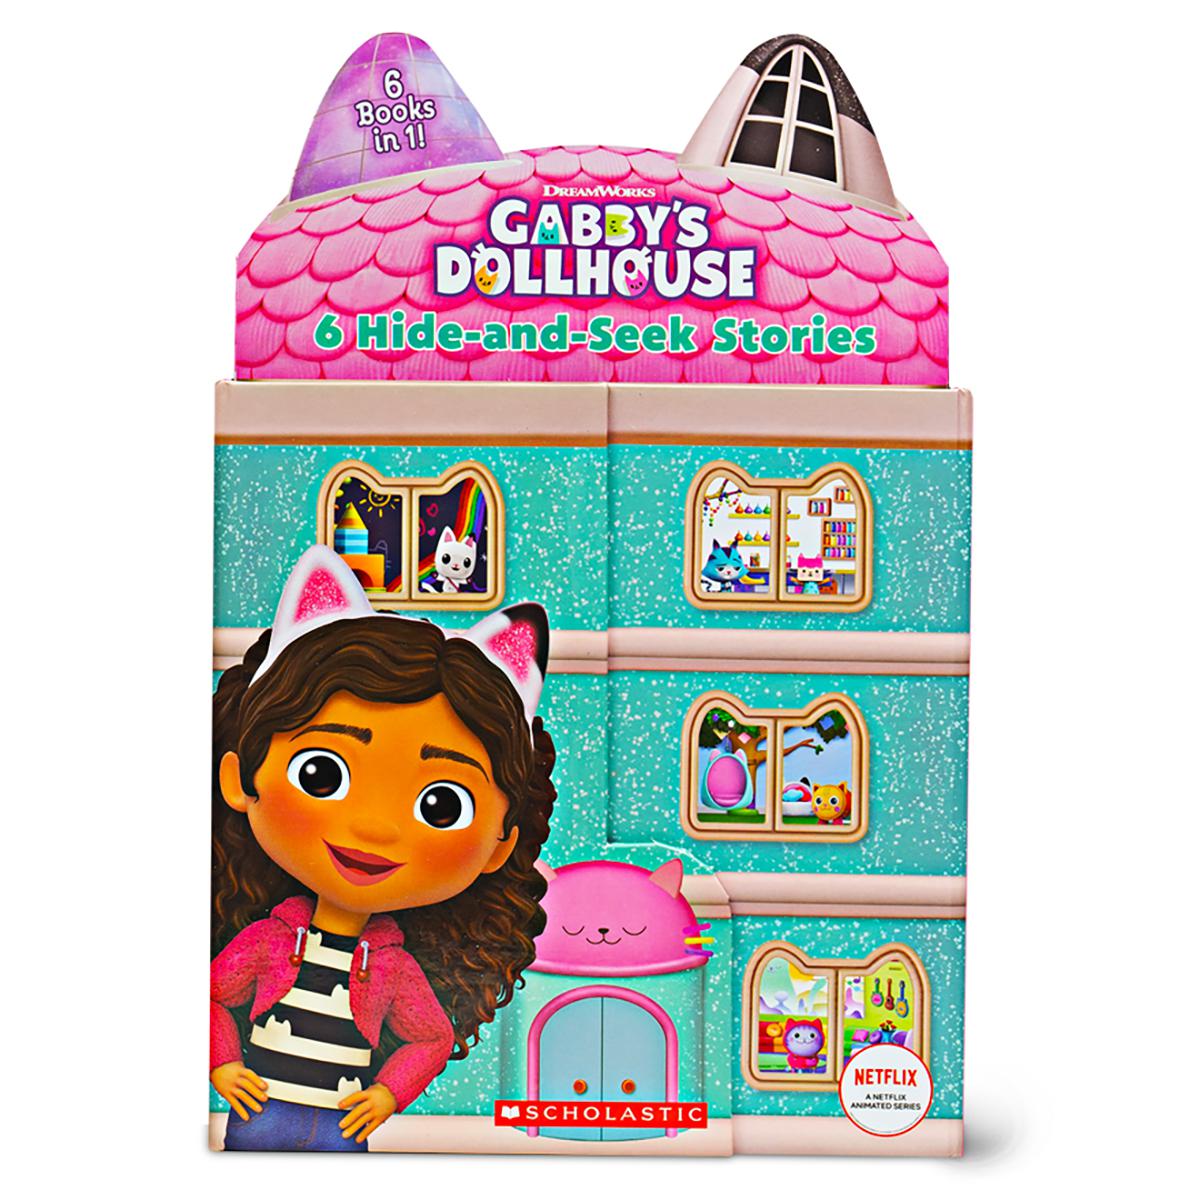  Gabby's Dollhouse: 6 Hide-and-Seek Stories 